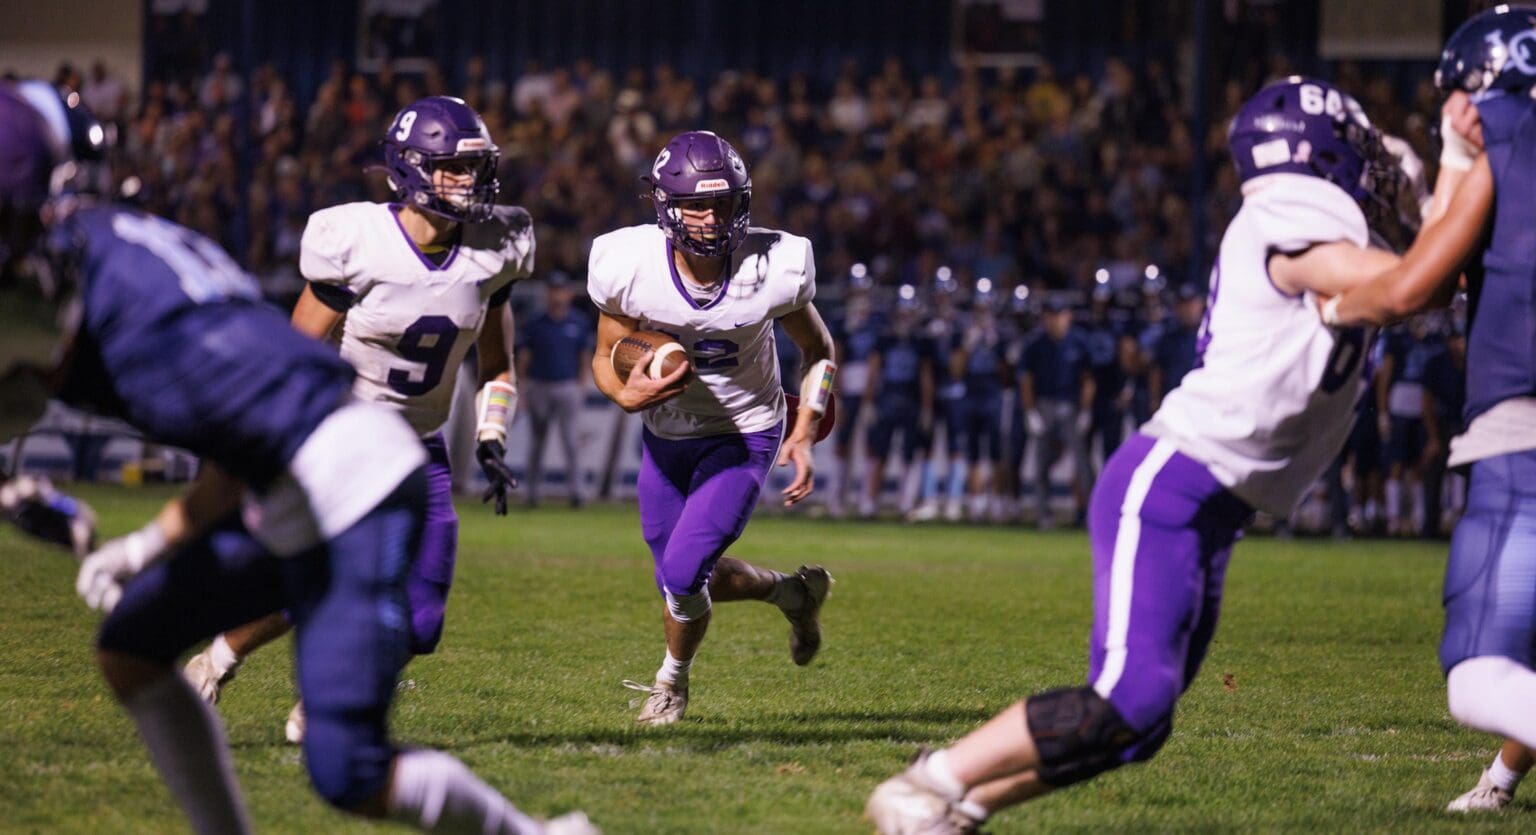 Nooksack Valley quarterback Joey Brown looks for an opening as his teammates try to defend him.